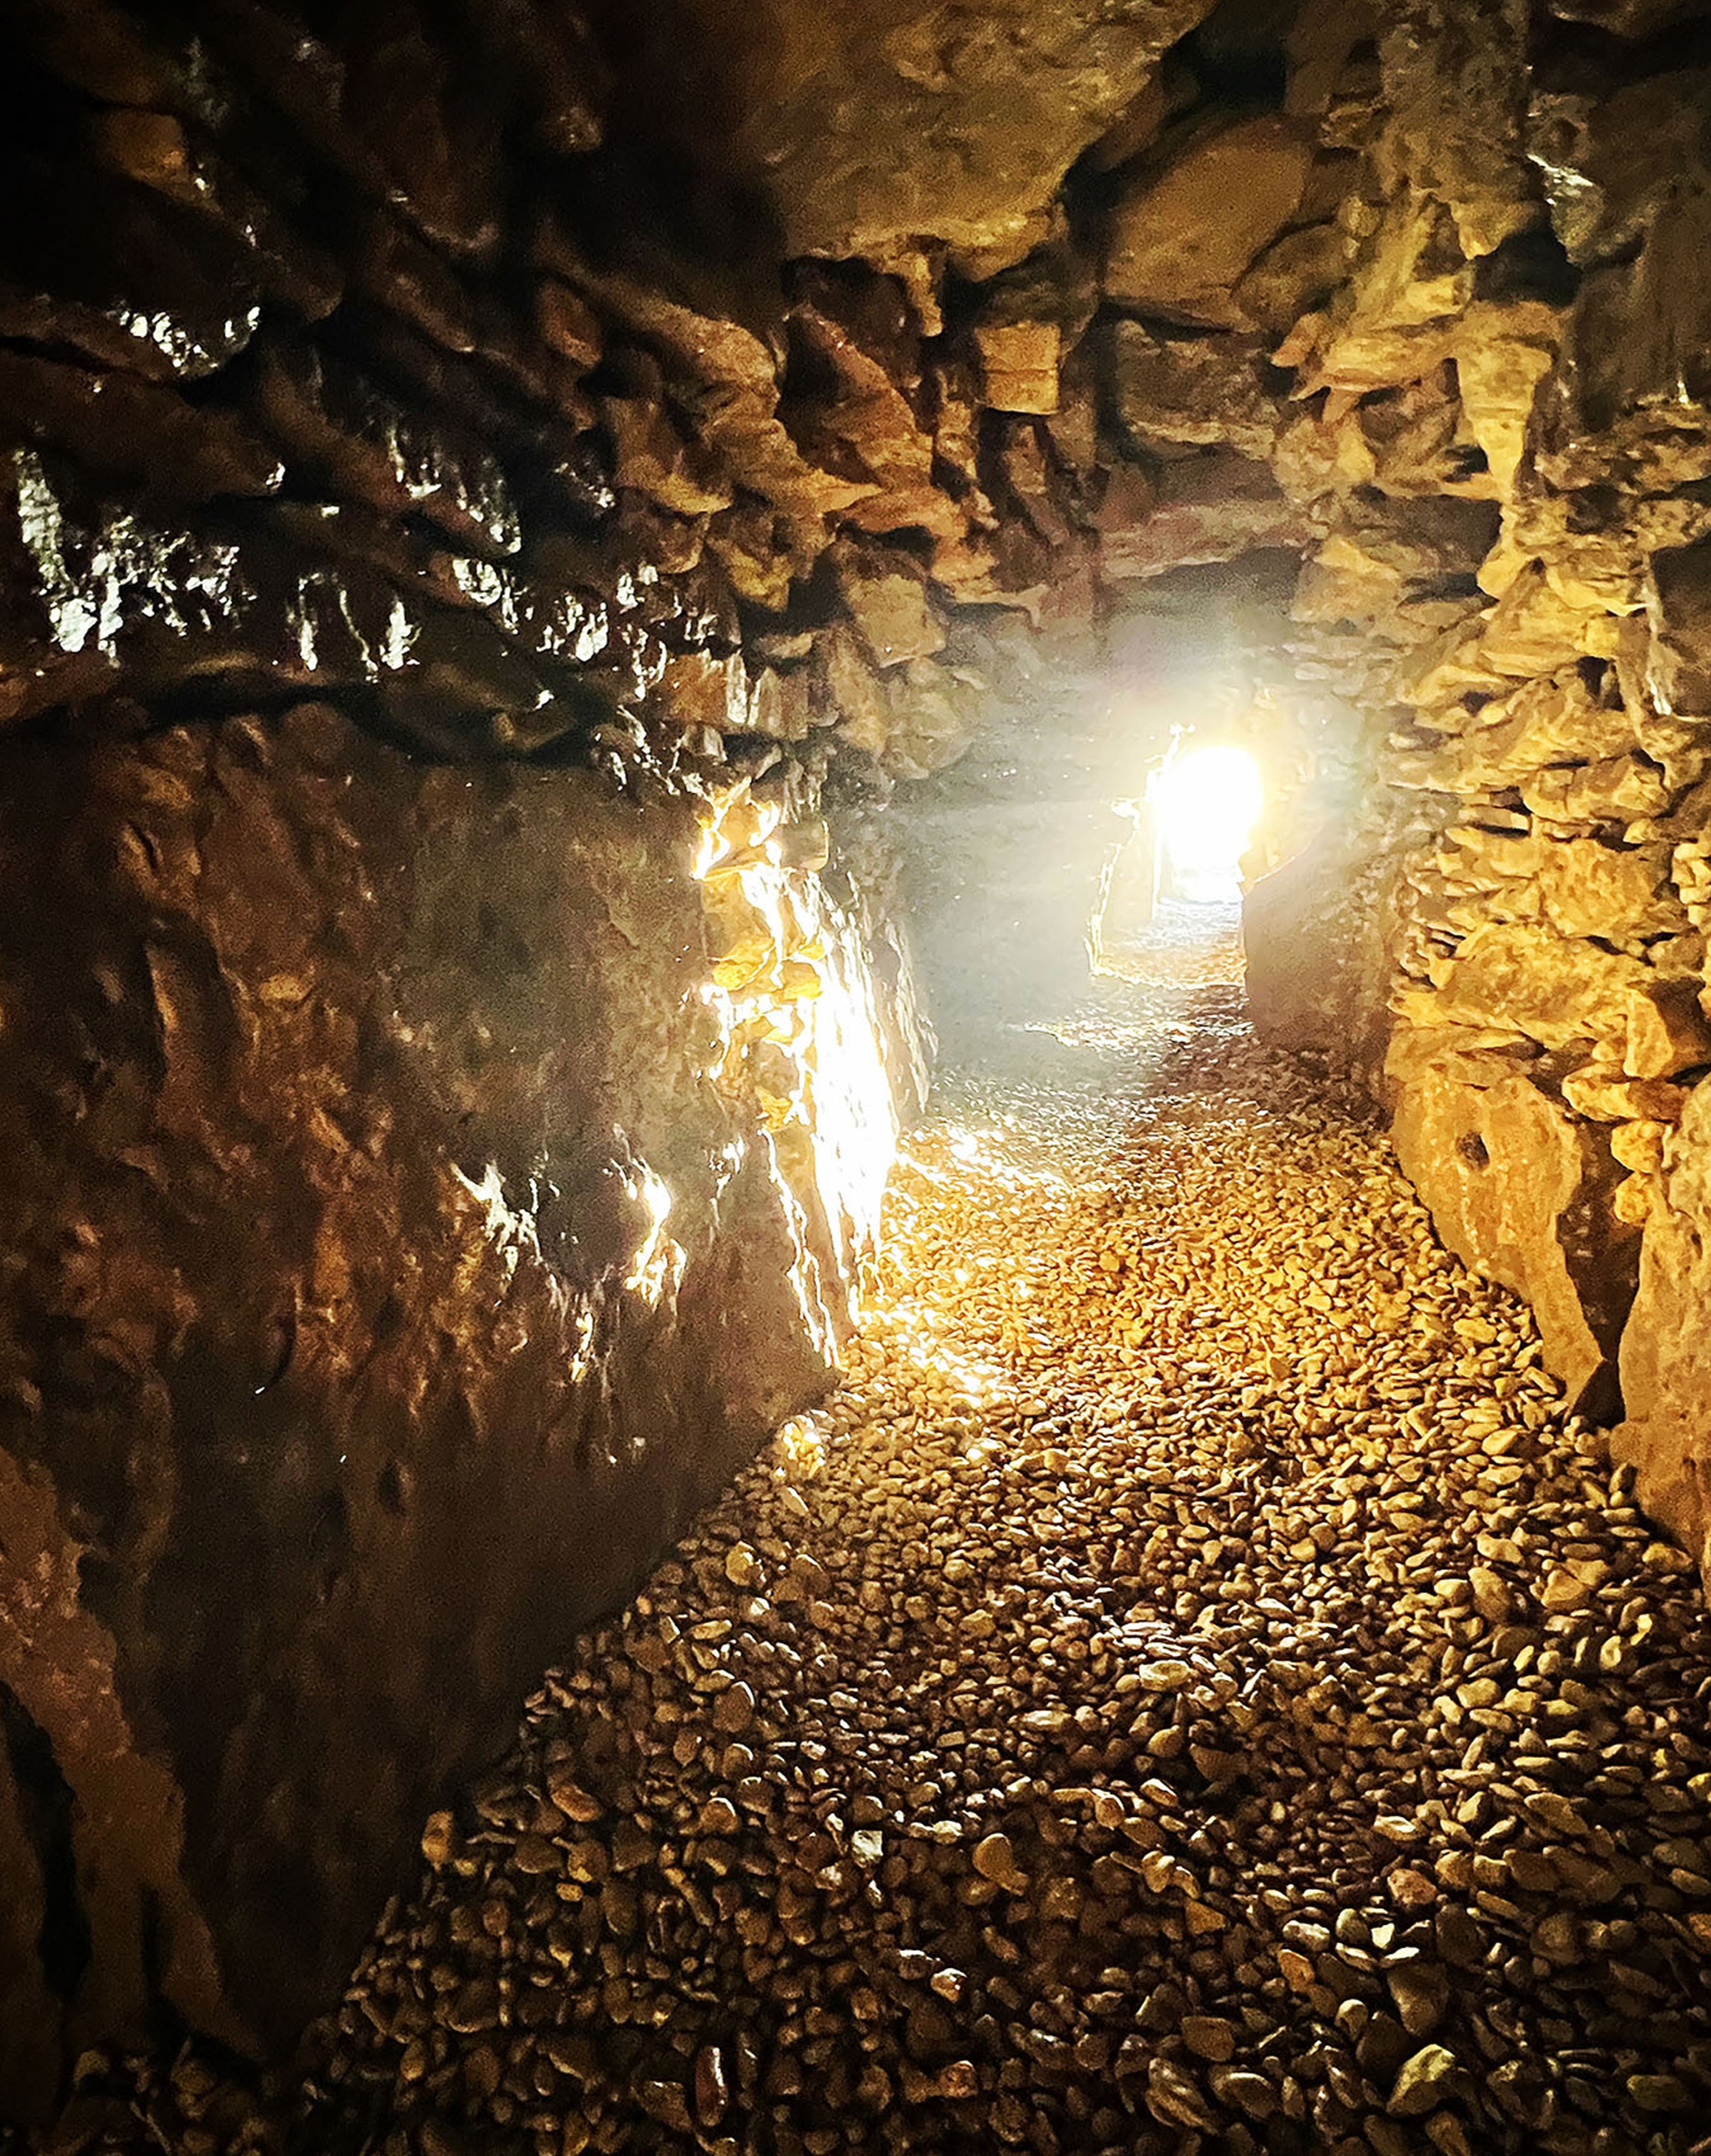 a passageway is illuminated with the sun at the far end of the picture. the passageway is ancient, with round stones on the bottom and large stones lining the walls and the ceiling